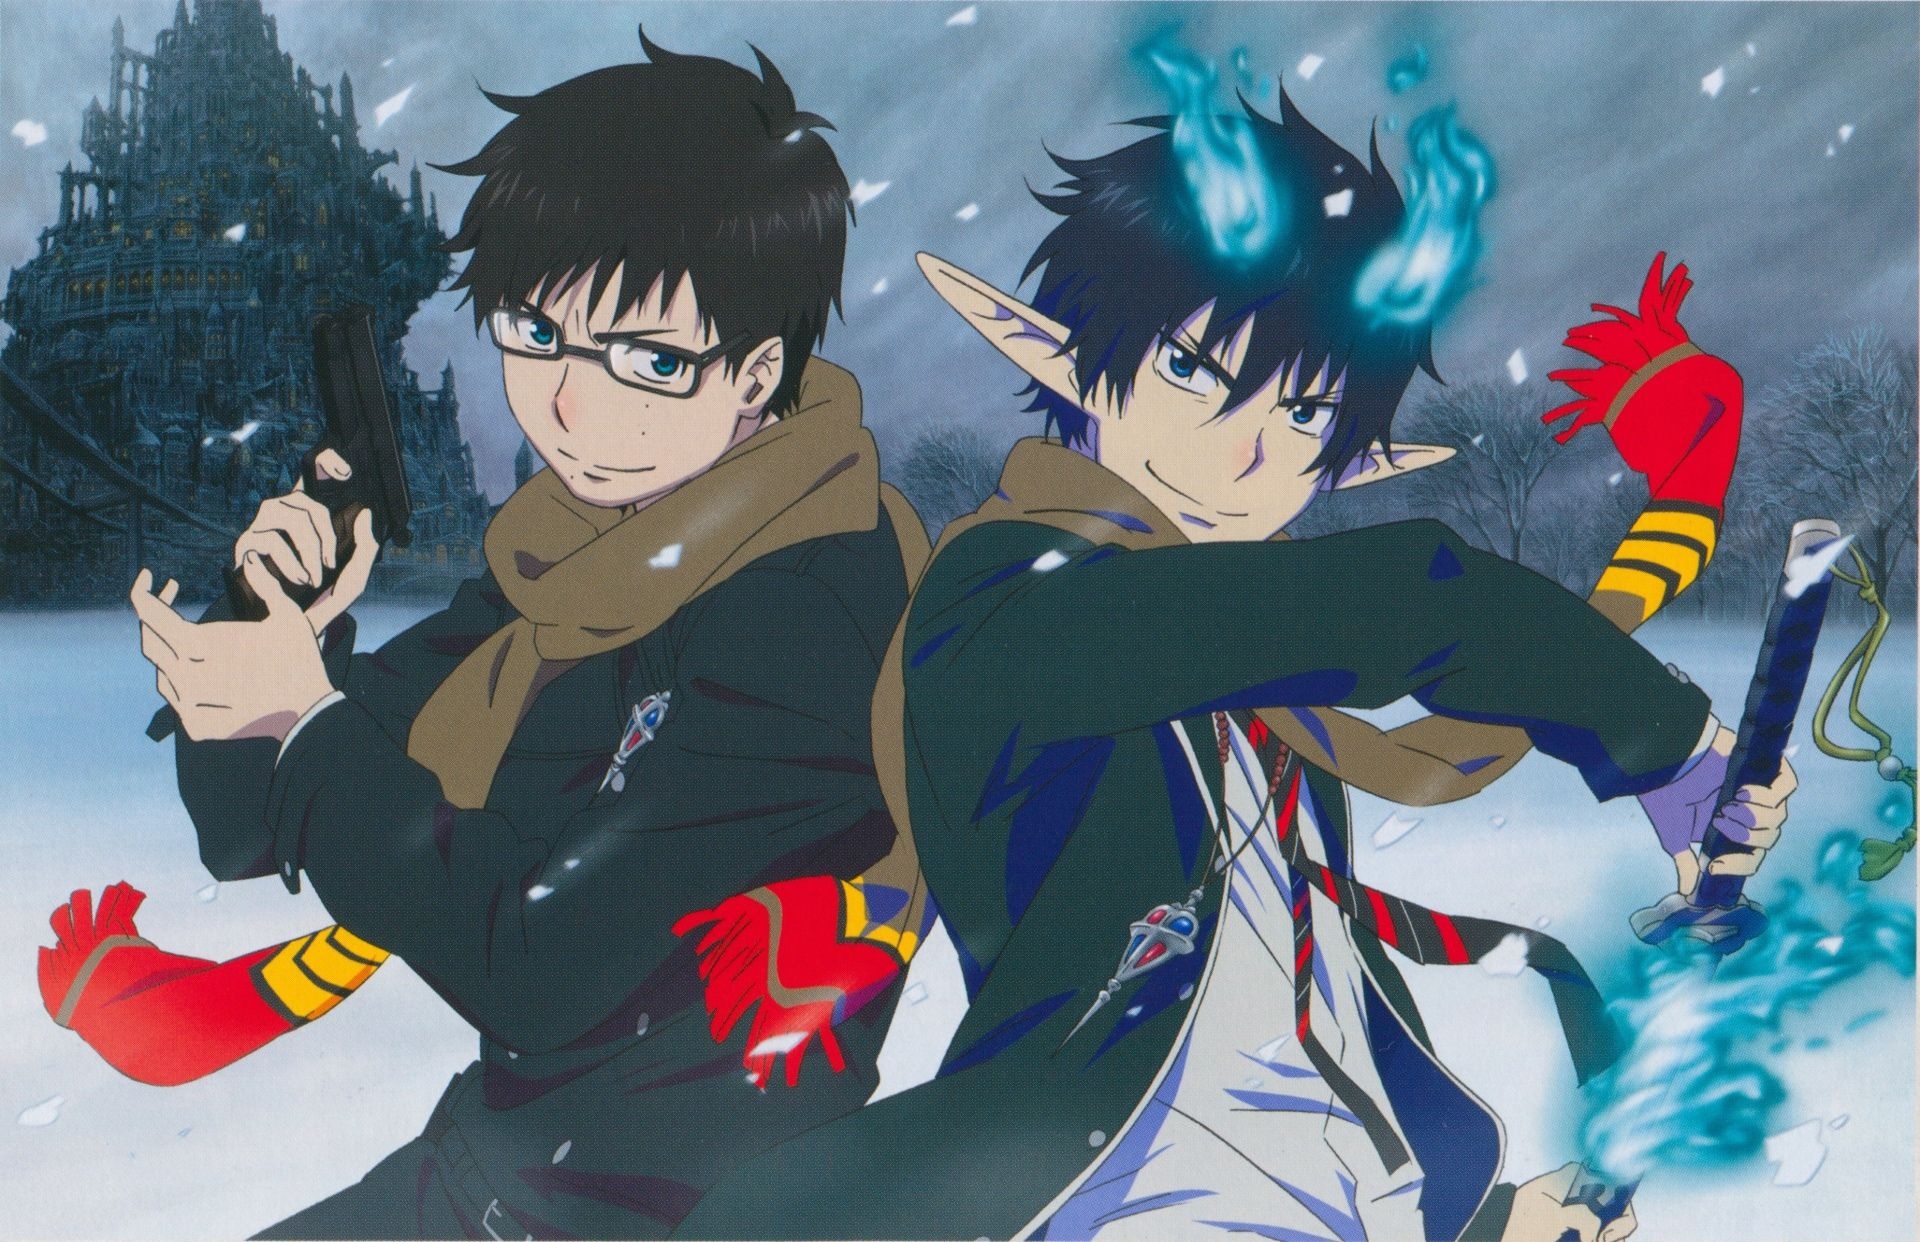 Anime blue exorcist wallpaper, Blue exorcist rin, Captivating characters, Artistic style, 1920x1250 HD Desktop